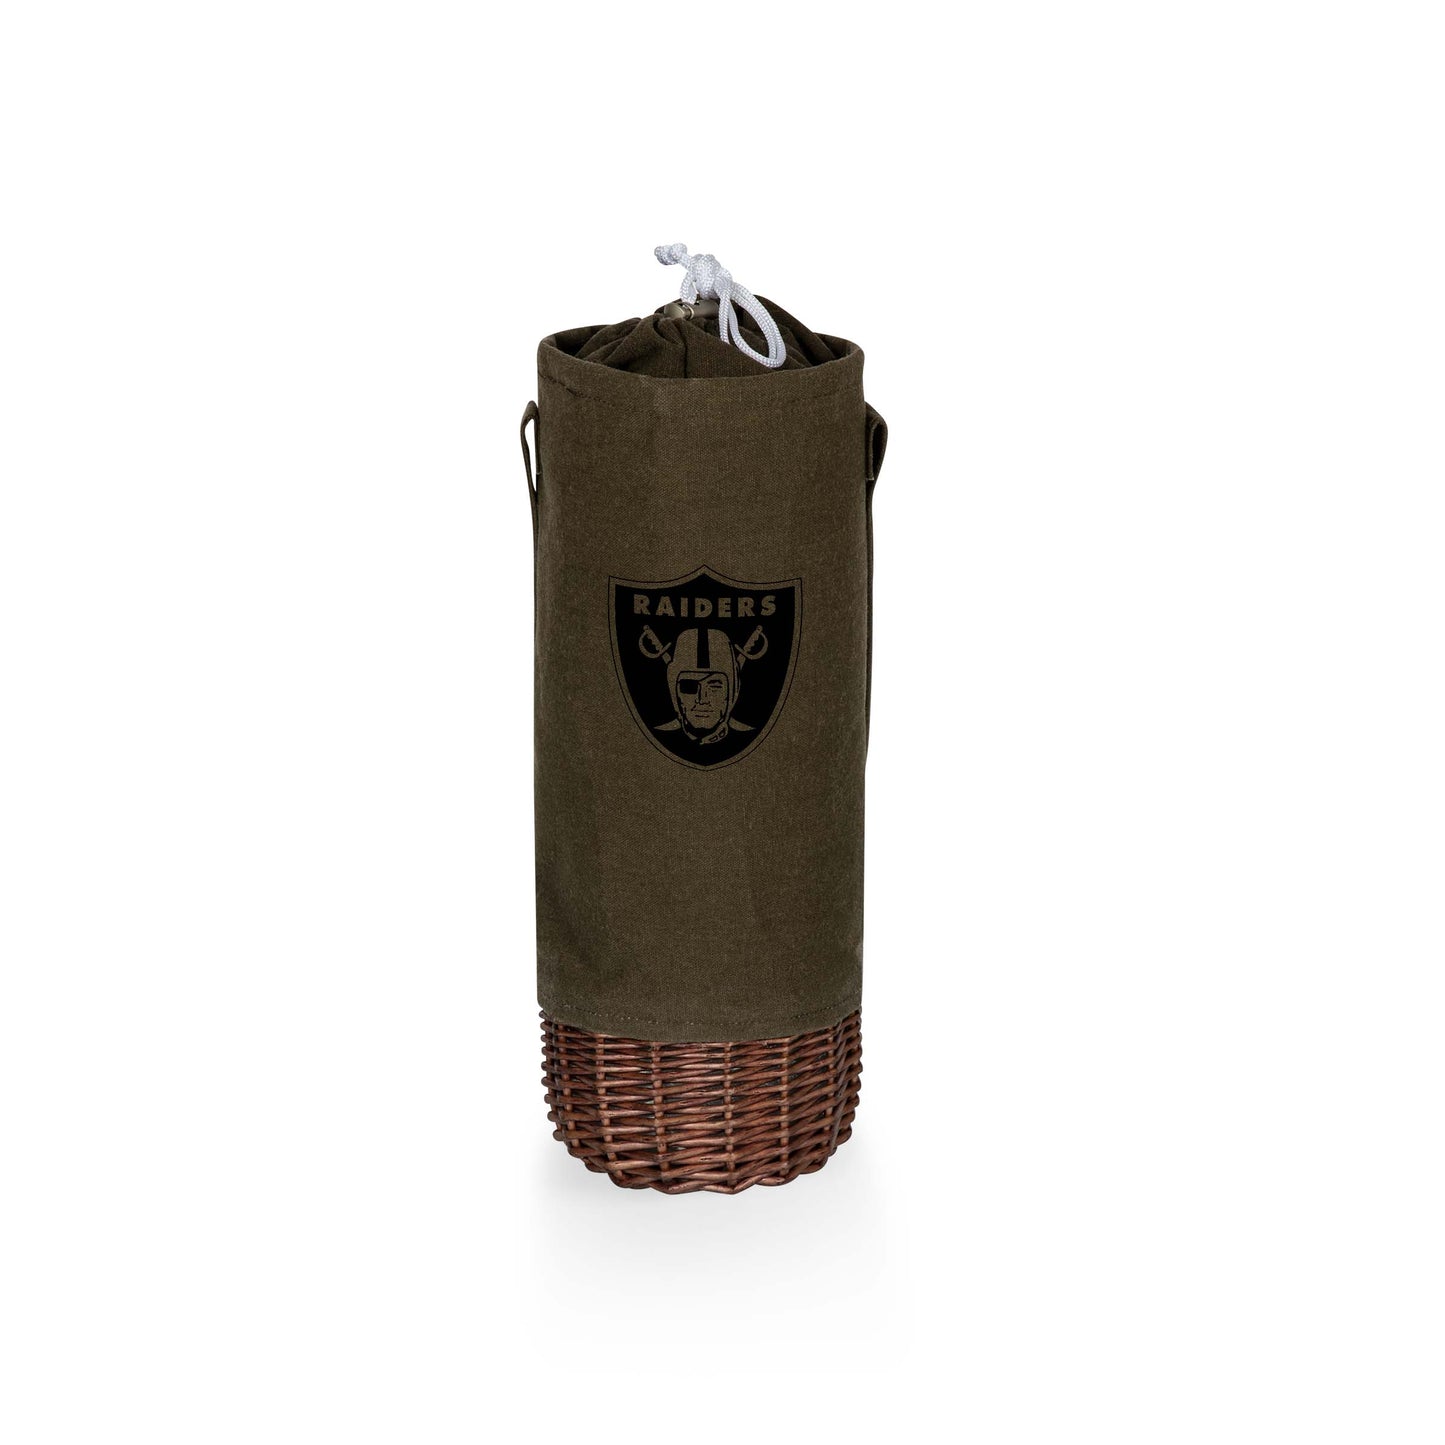 Las Vegas Raiders - Malbec Insulated Canvas and Willow Wine Bottle Basket